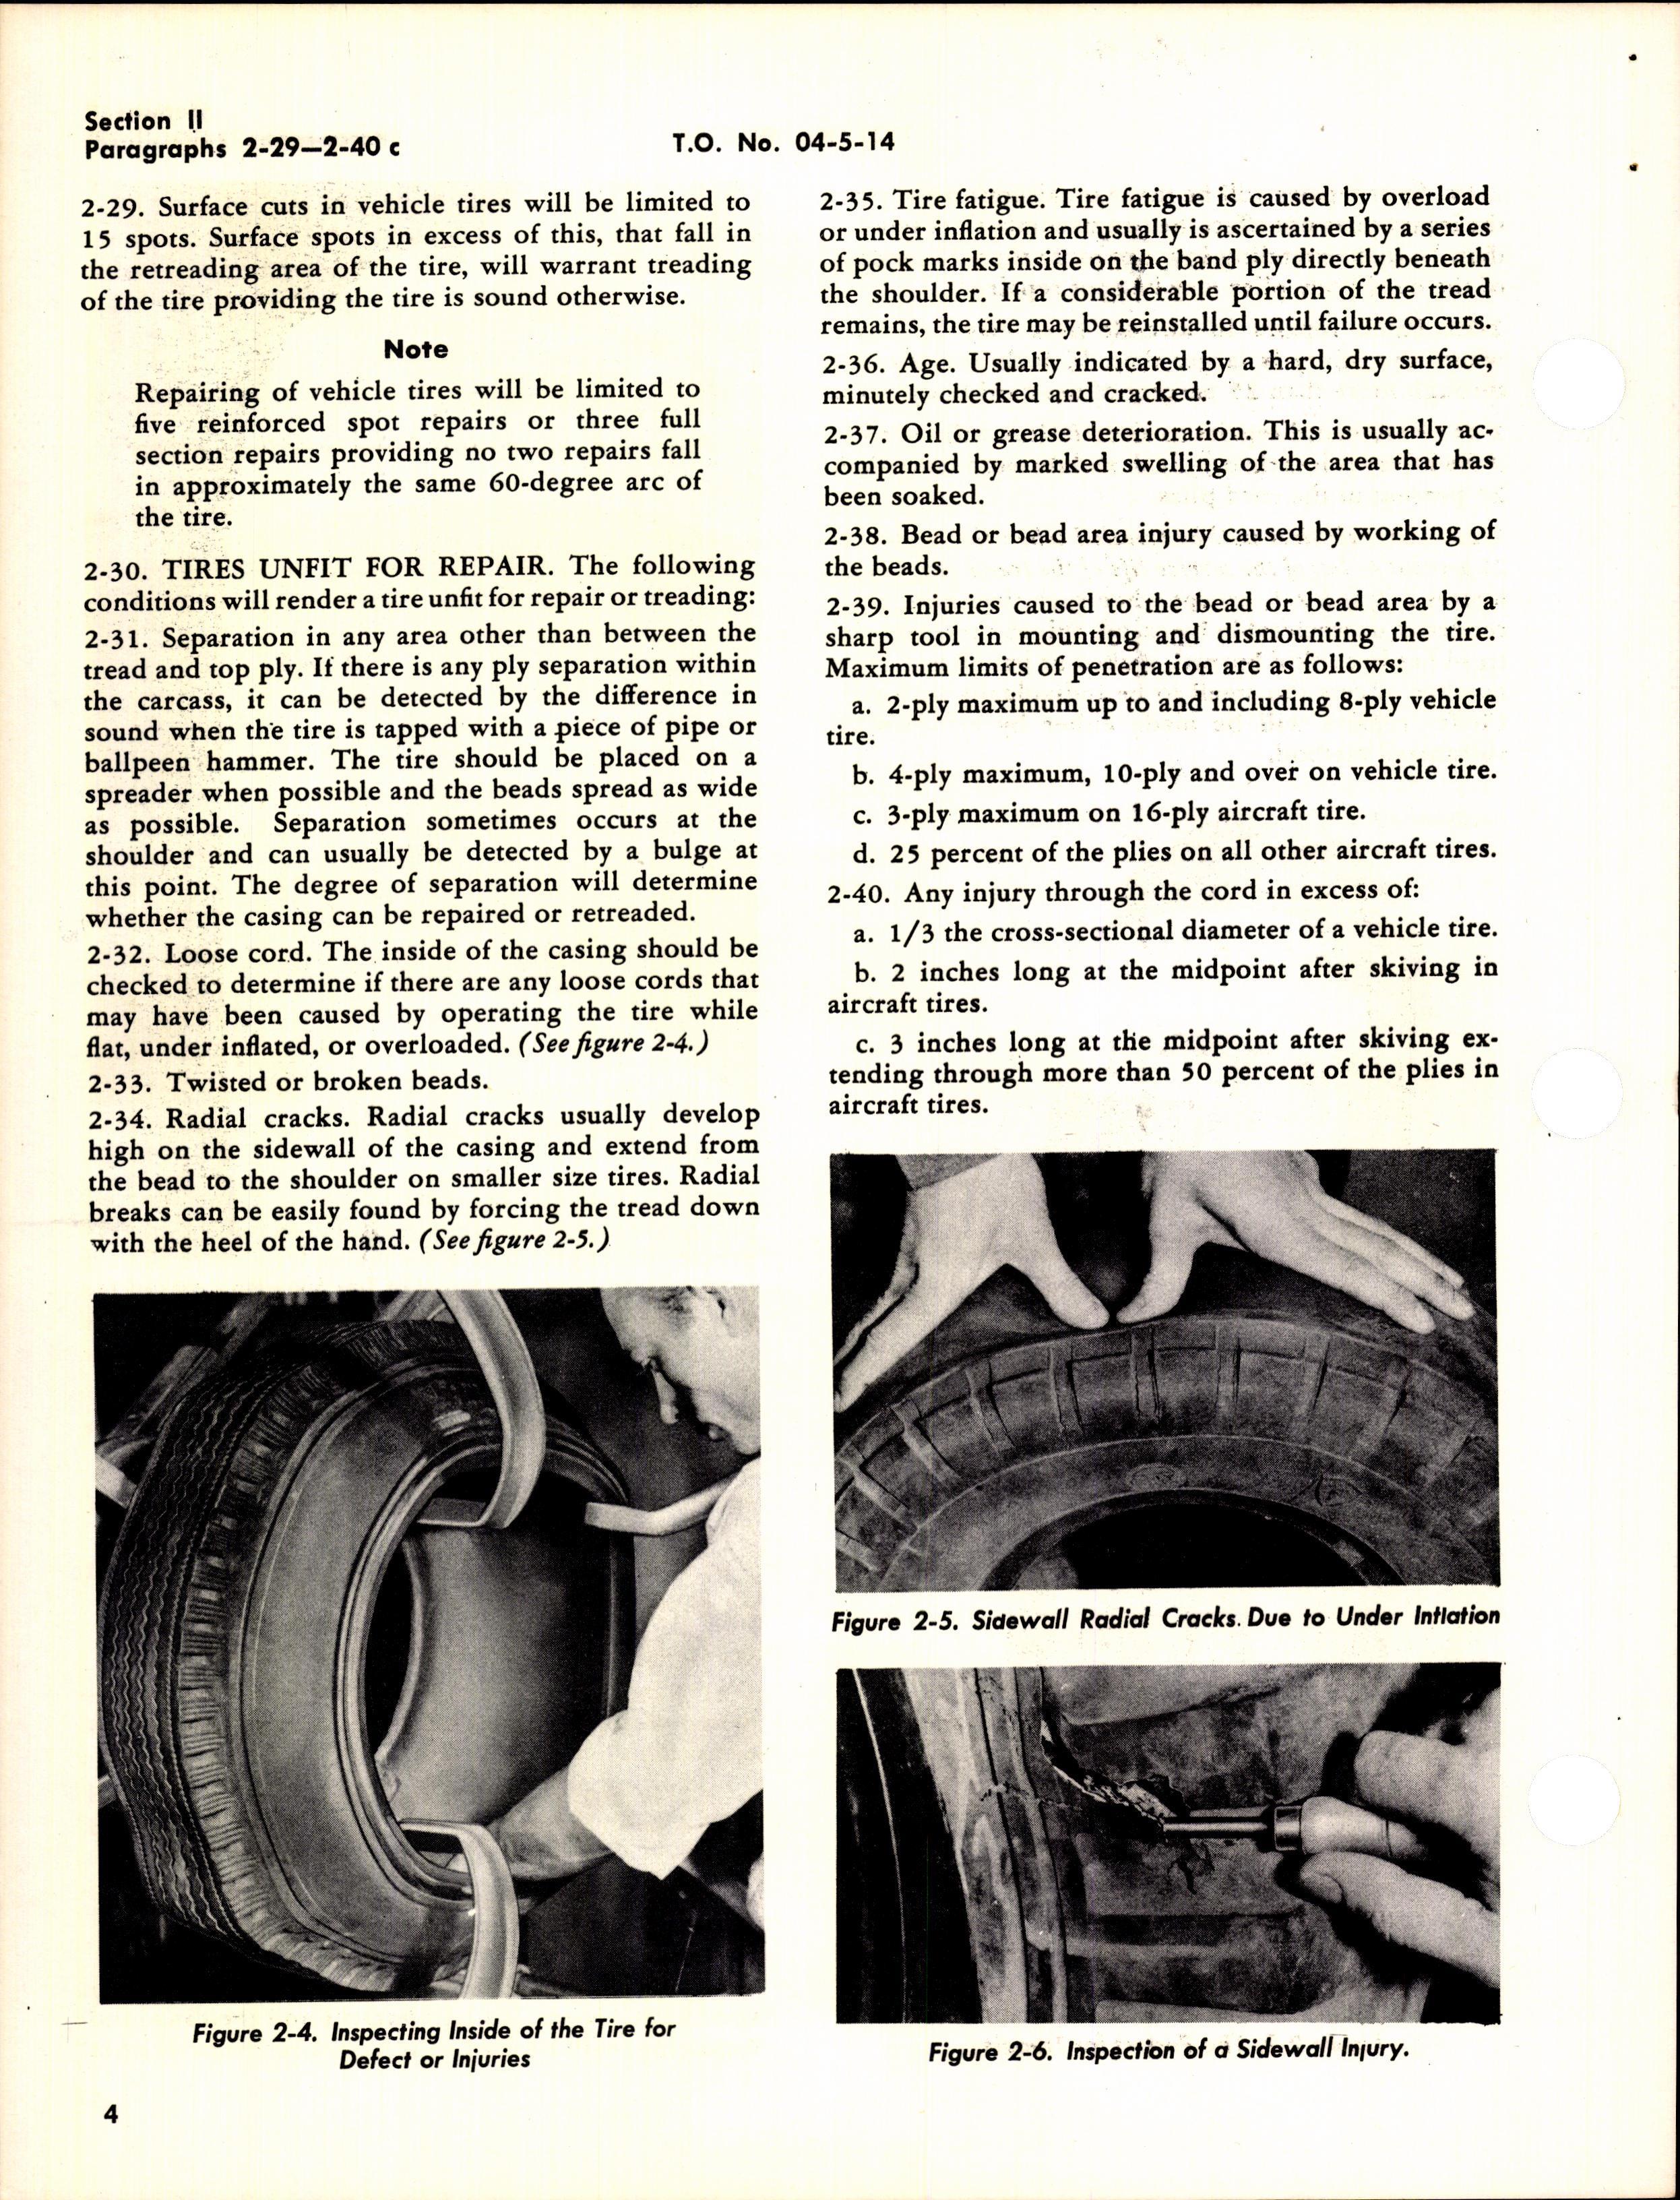 Sample page 8 from AirCorps Library document: Inspection and Operation Instructions for Tire Repairing